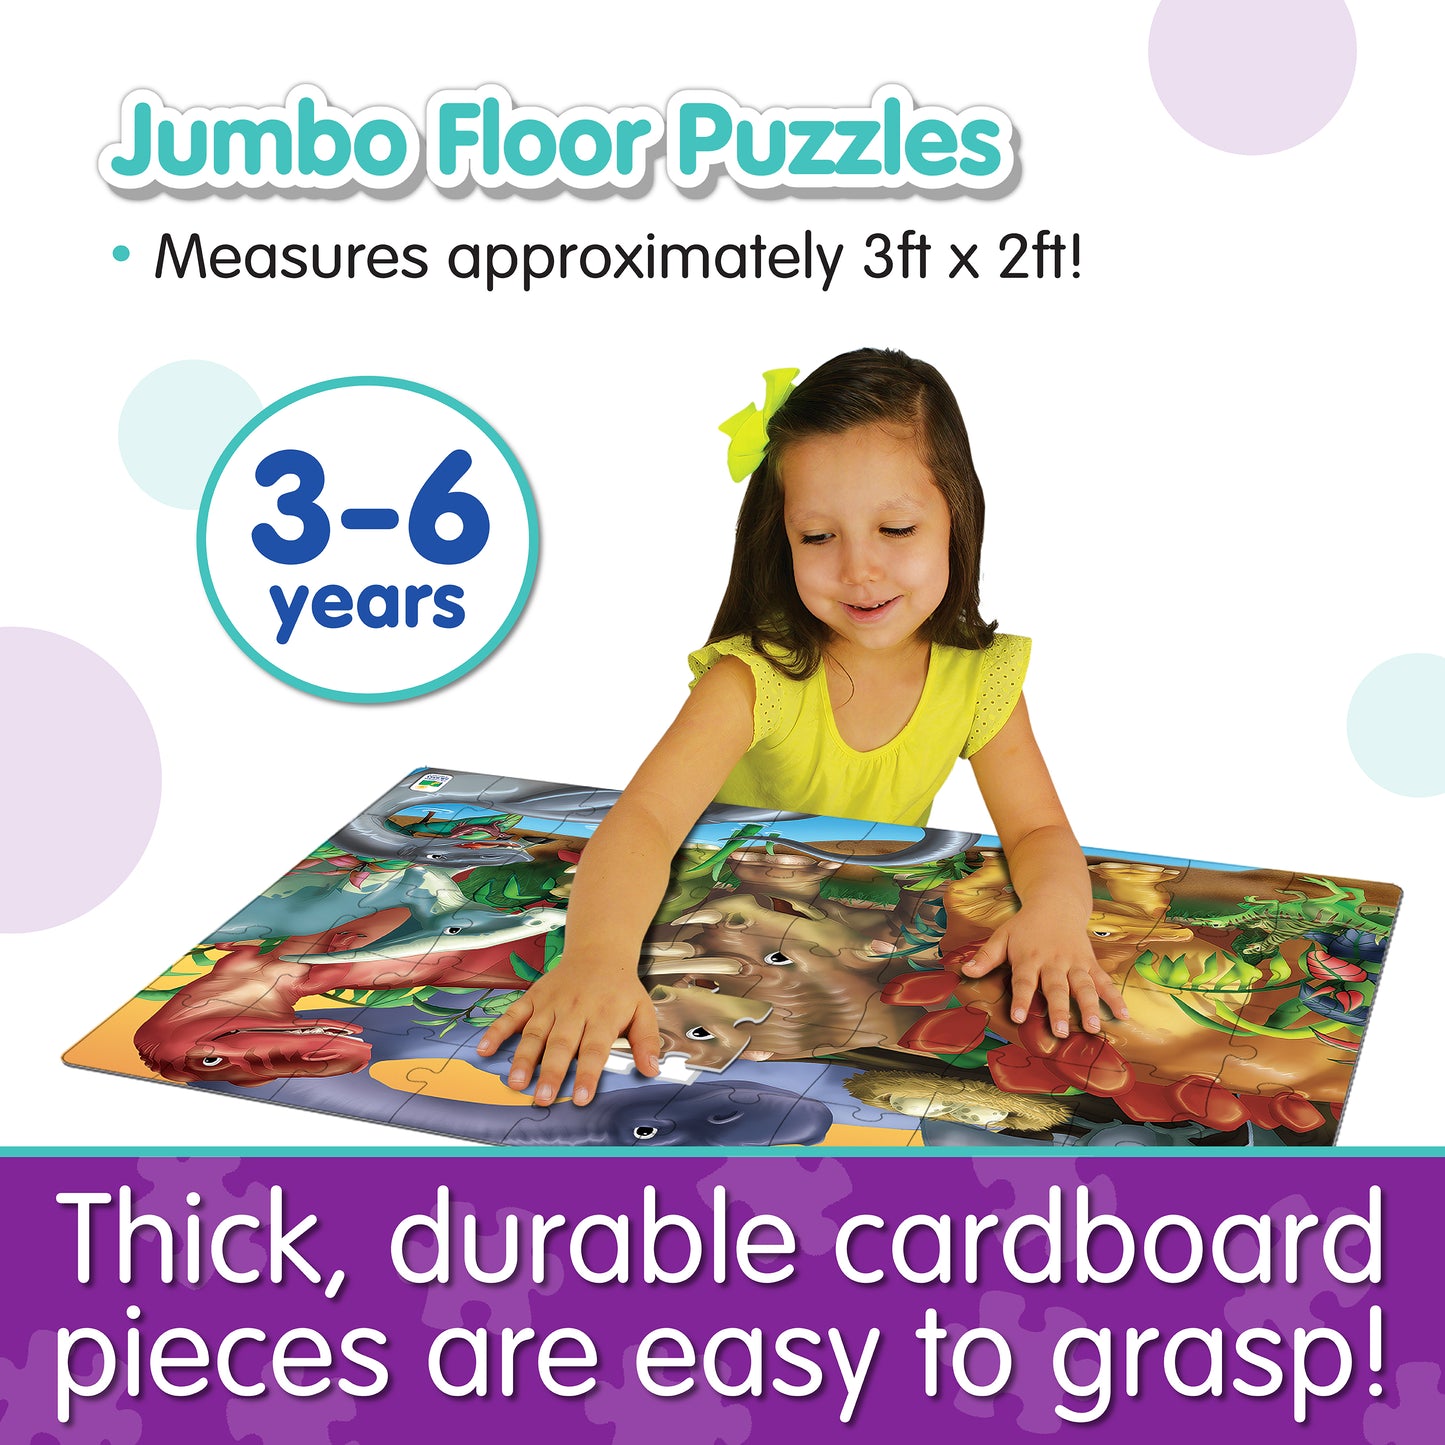 Infographic of young girl playing with Jumbo Floor Puzzle - Dinosaurs that reads, "Thick, durable cardboard pieces are easy to grasp!"